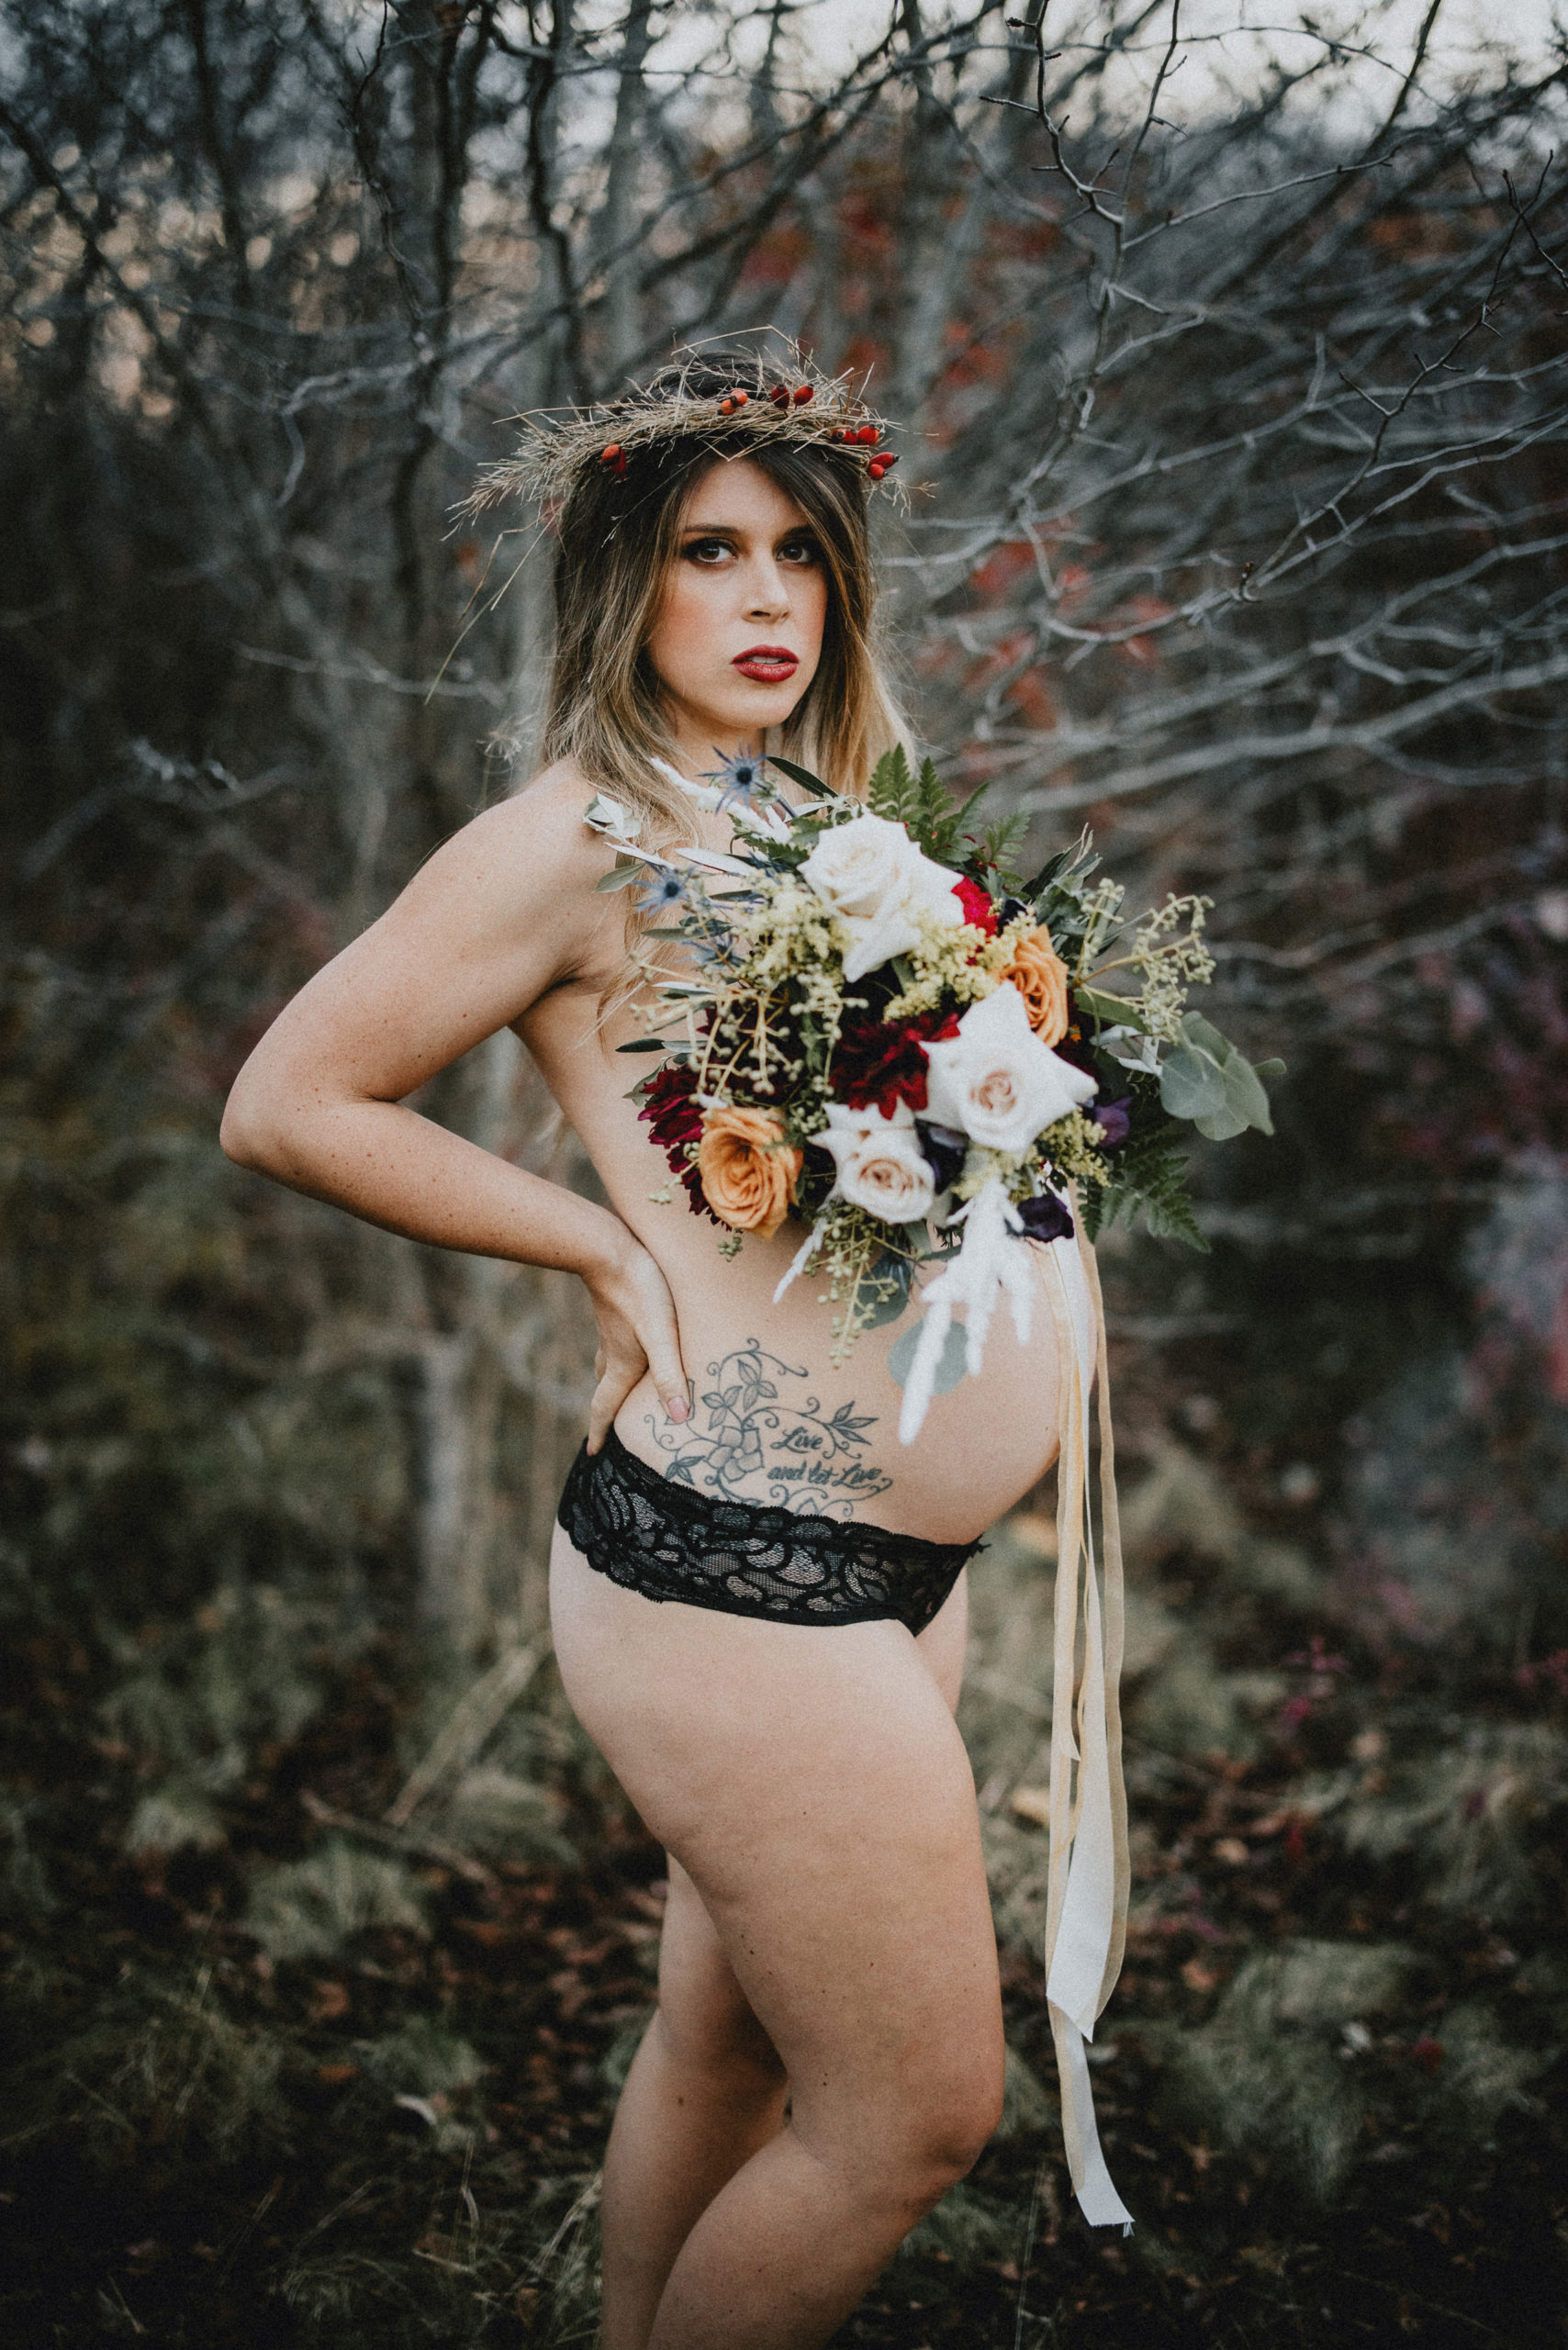 pregnant nude maternity boudoir outdoor flowers crown berries fall outdoor photography